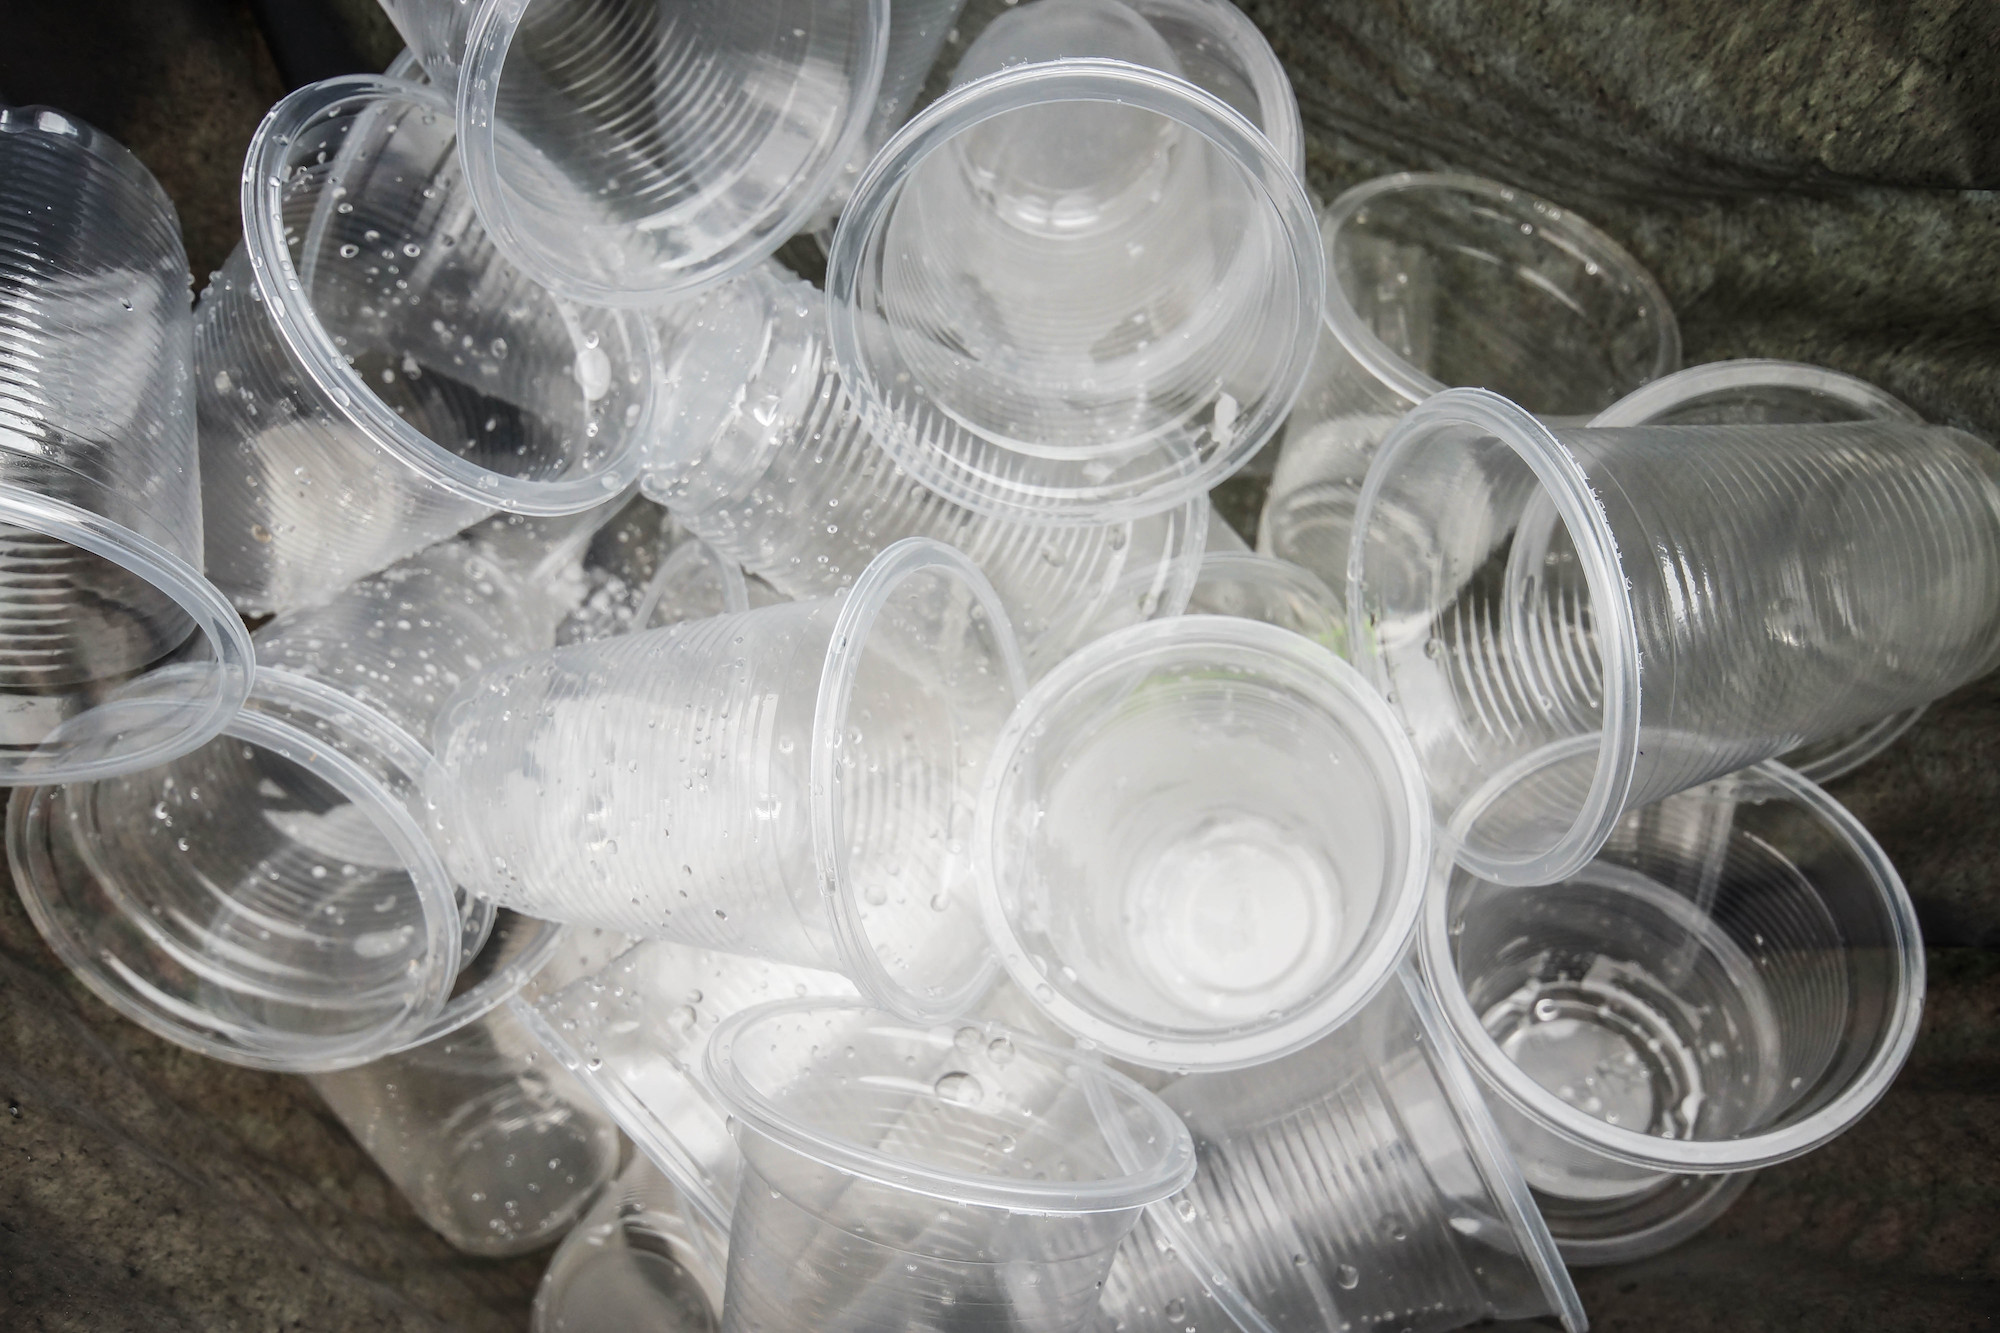 The list of banned plastic items in Macao is growing